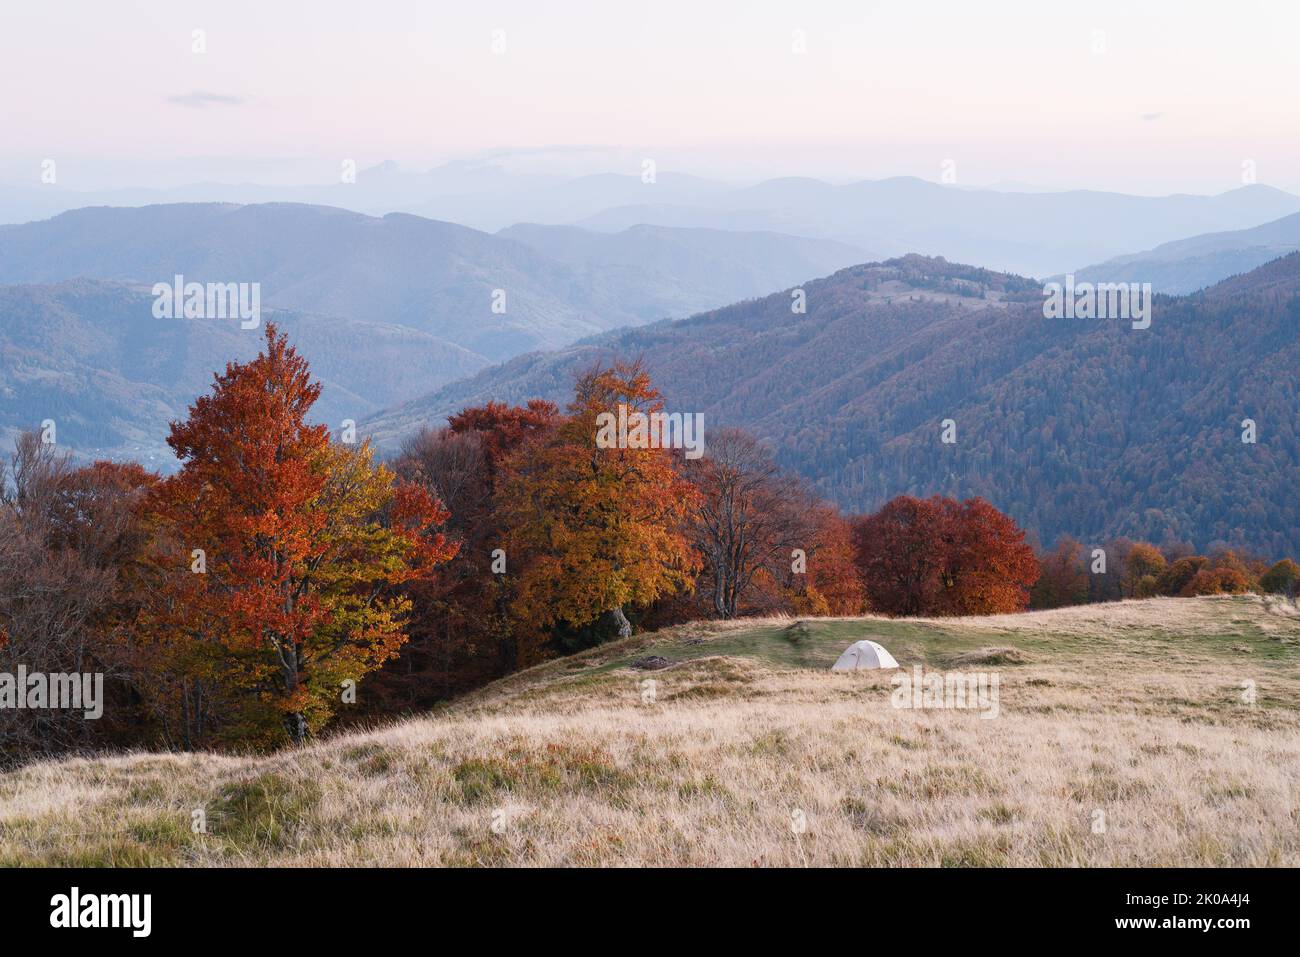 Autumn landscape with a tourist tent near a beech forest in the mountains Stock Photo